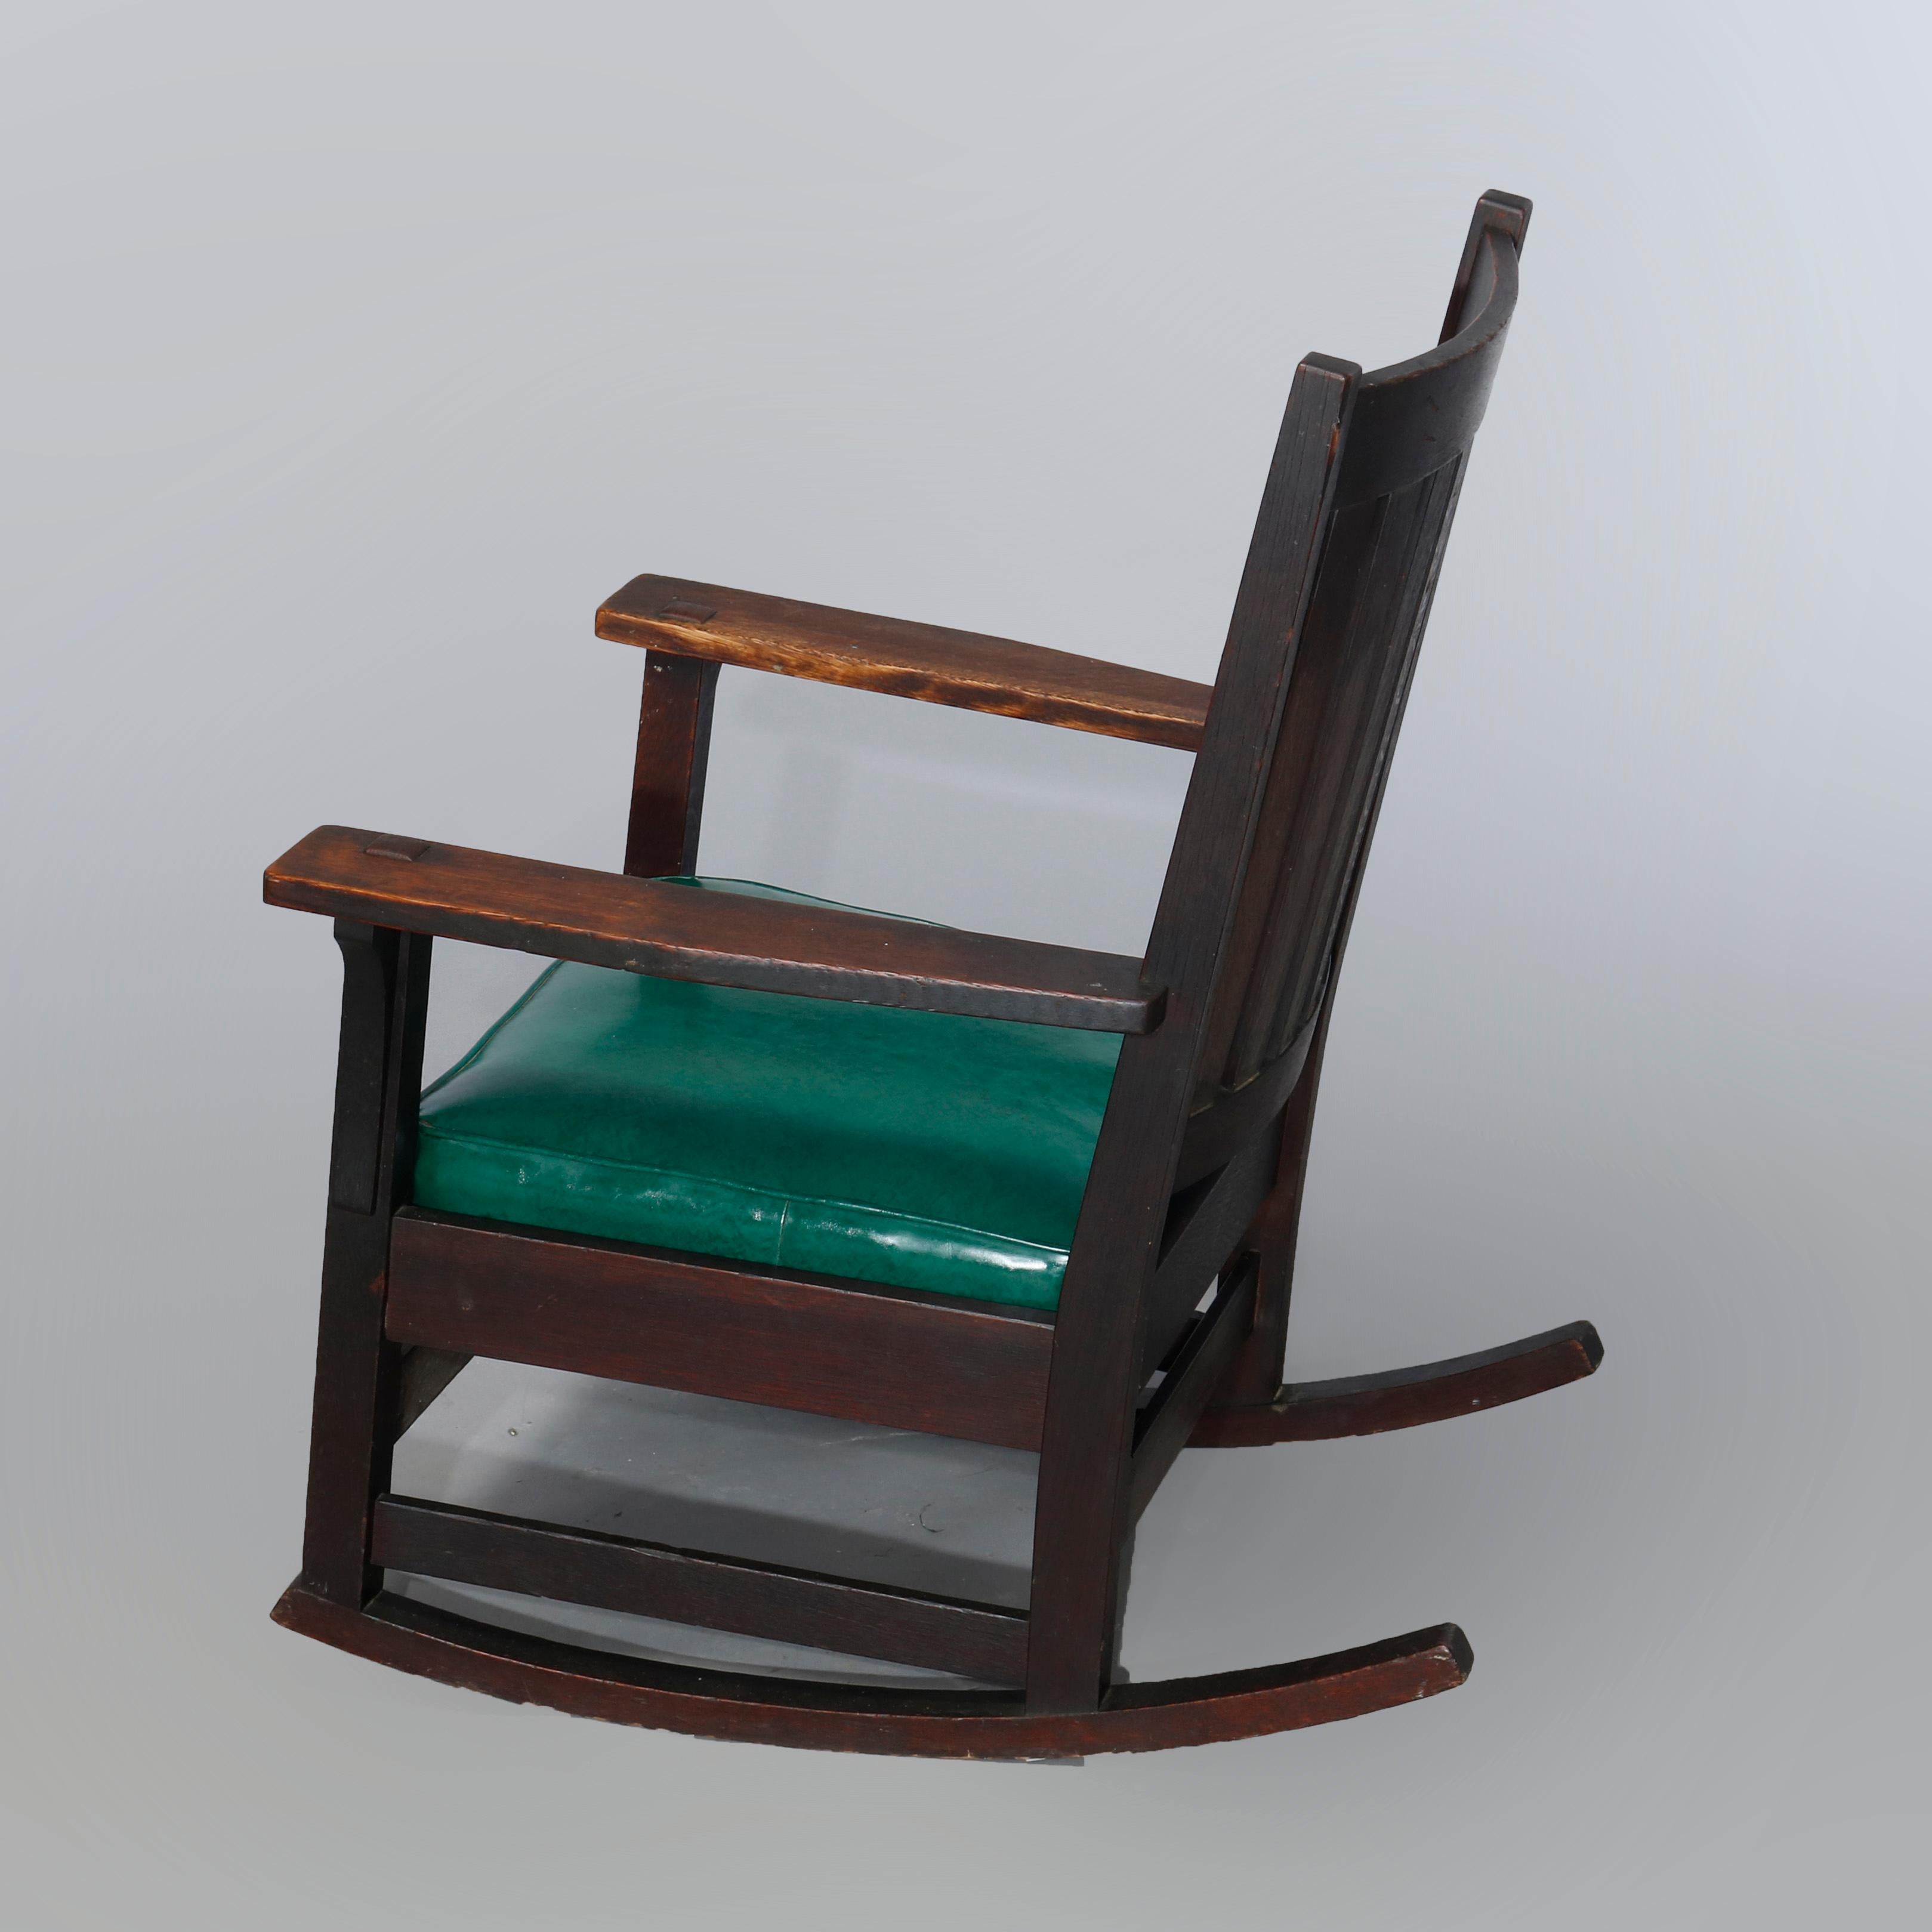 An antique Arts & Crafts Mission rocking chair by L & JG Stickley Handicraft offers handcrafted oak construction with slat back, signed, c1910

Measures: 34.5